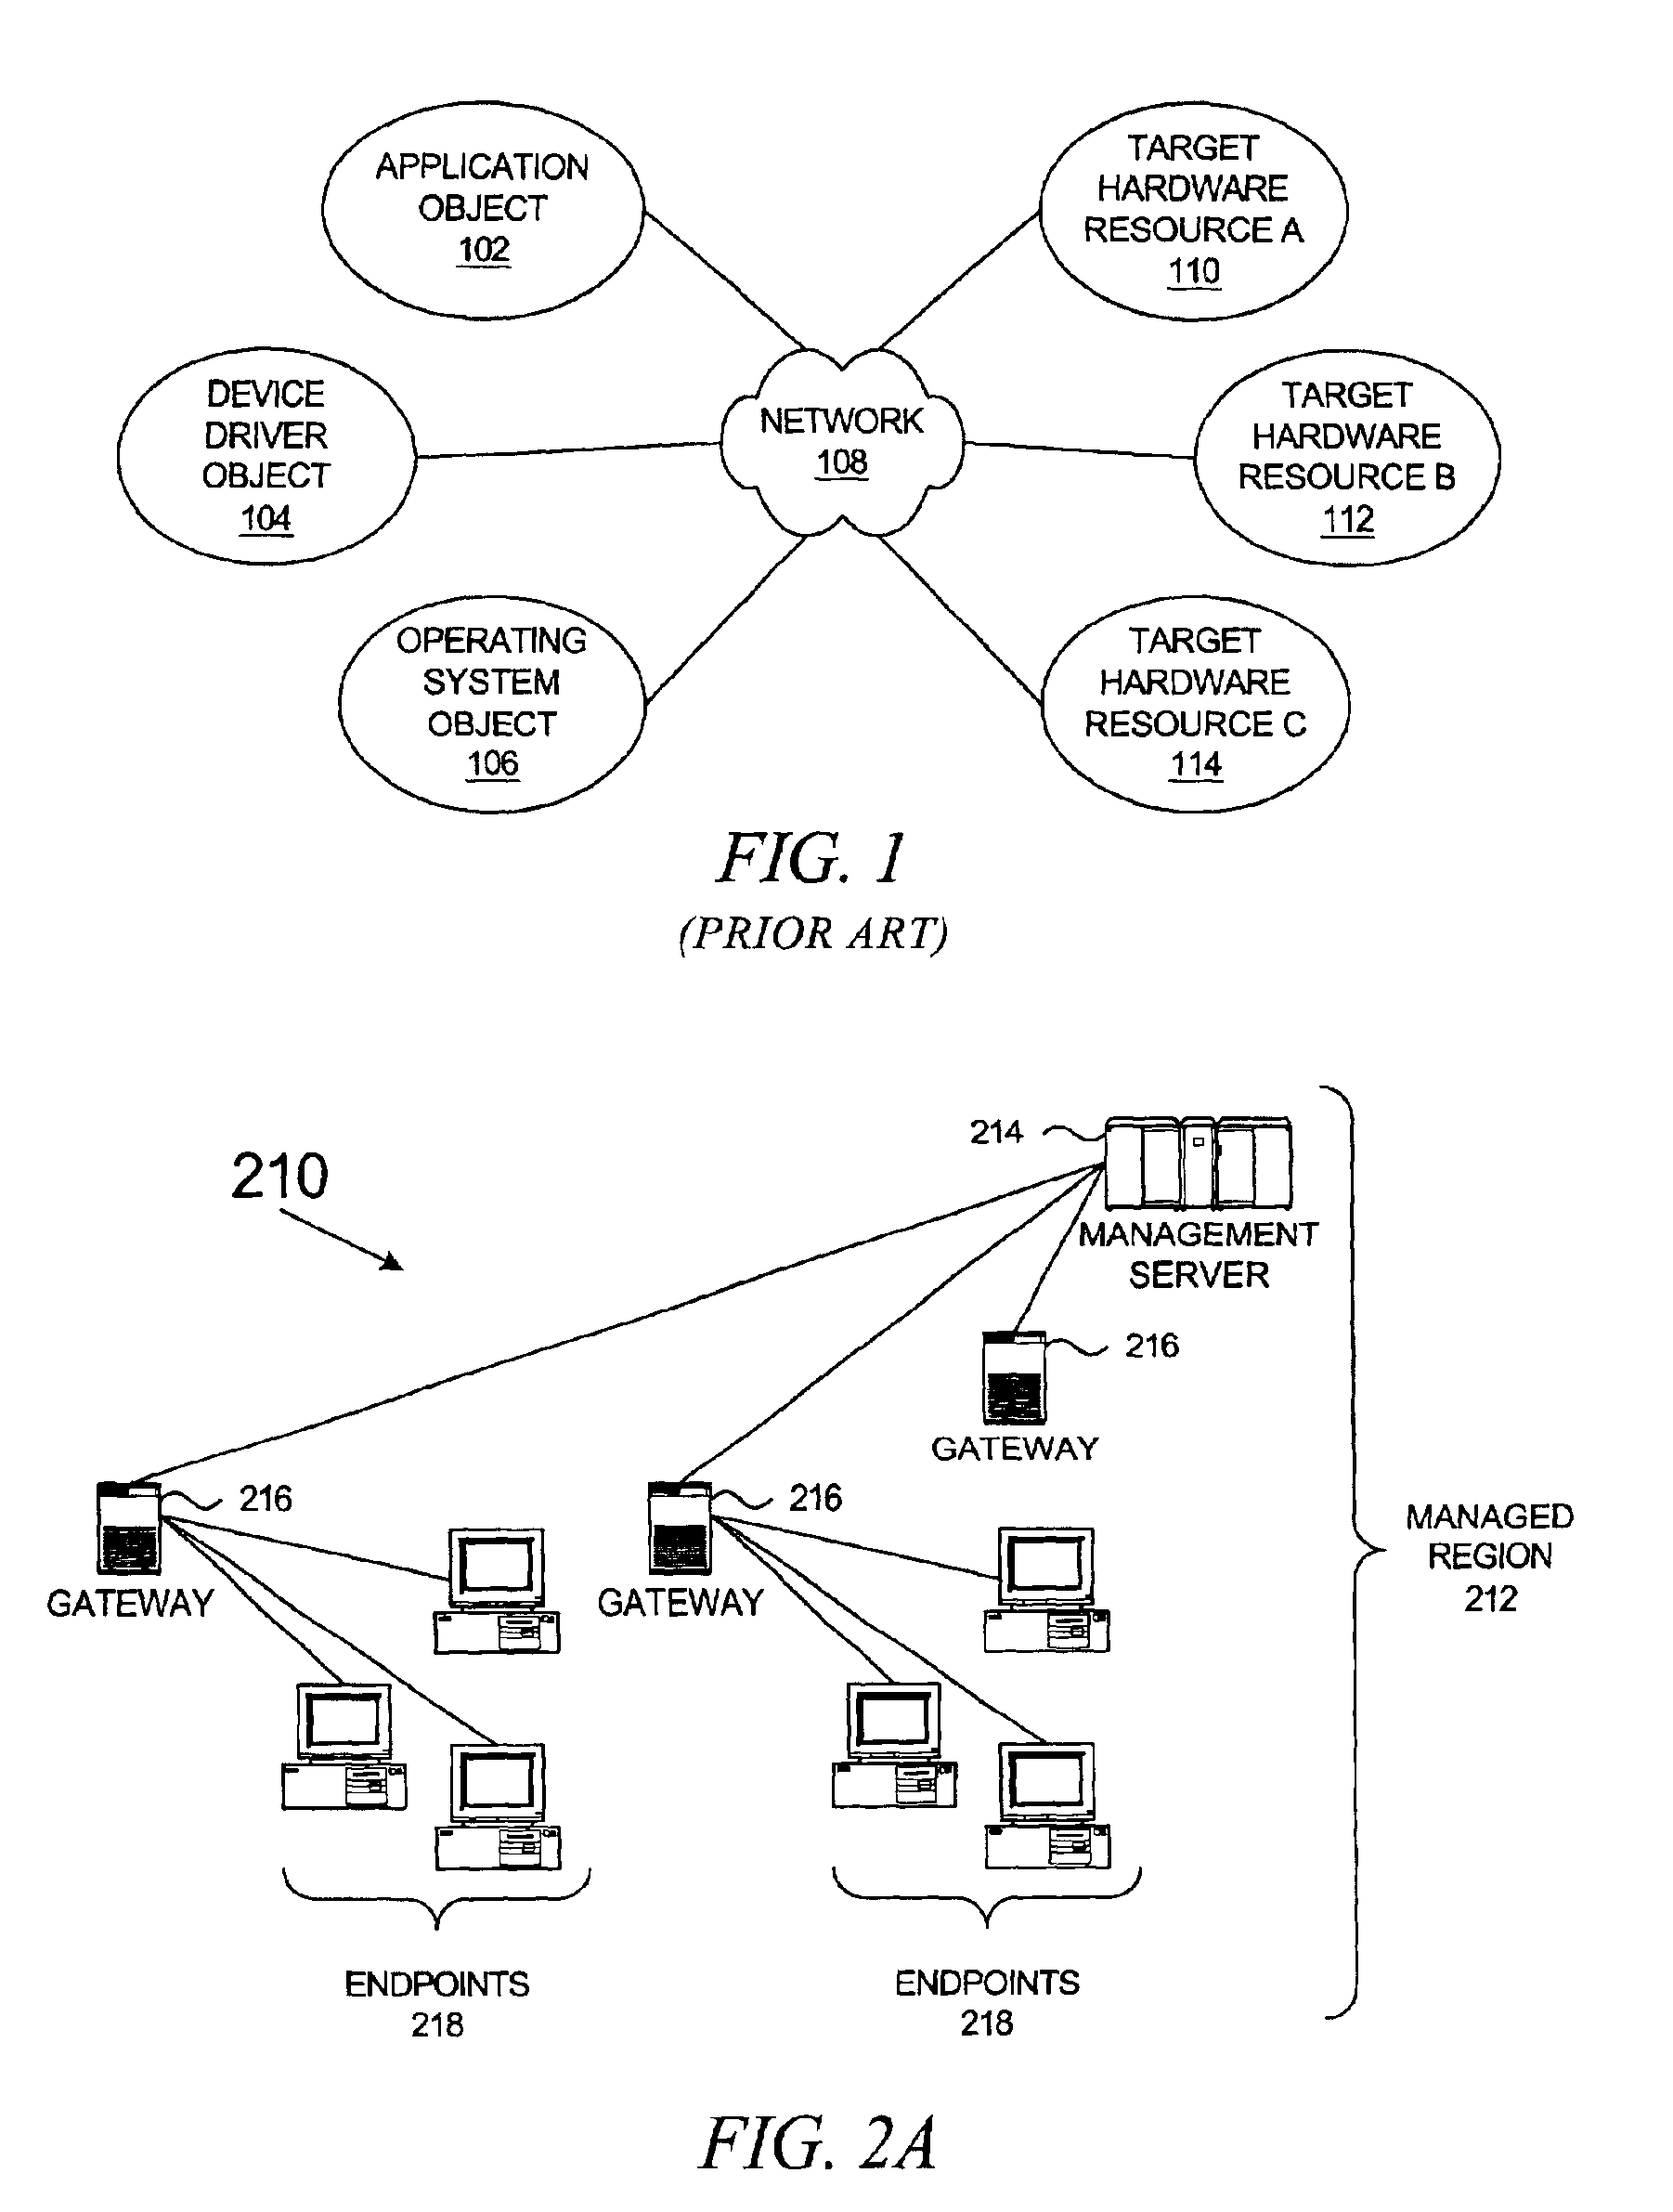 Method and system for adaptive caching in a network management framework using skeleton caches